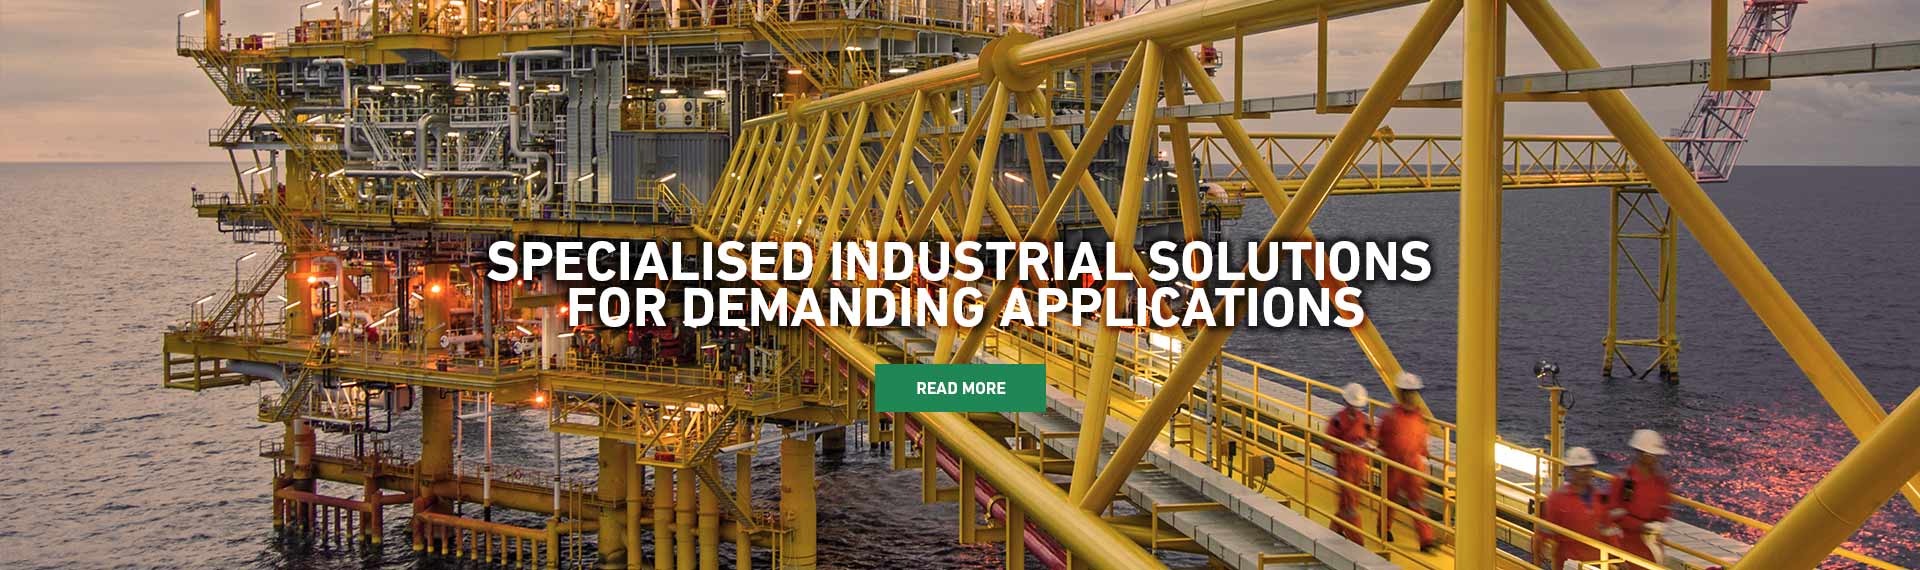 Specialized Industrial Solutions for demanding applications Equipco